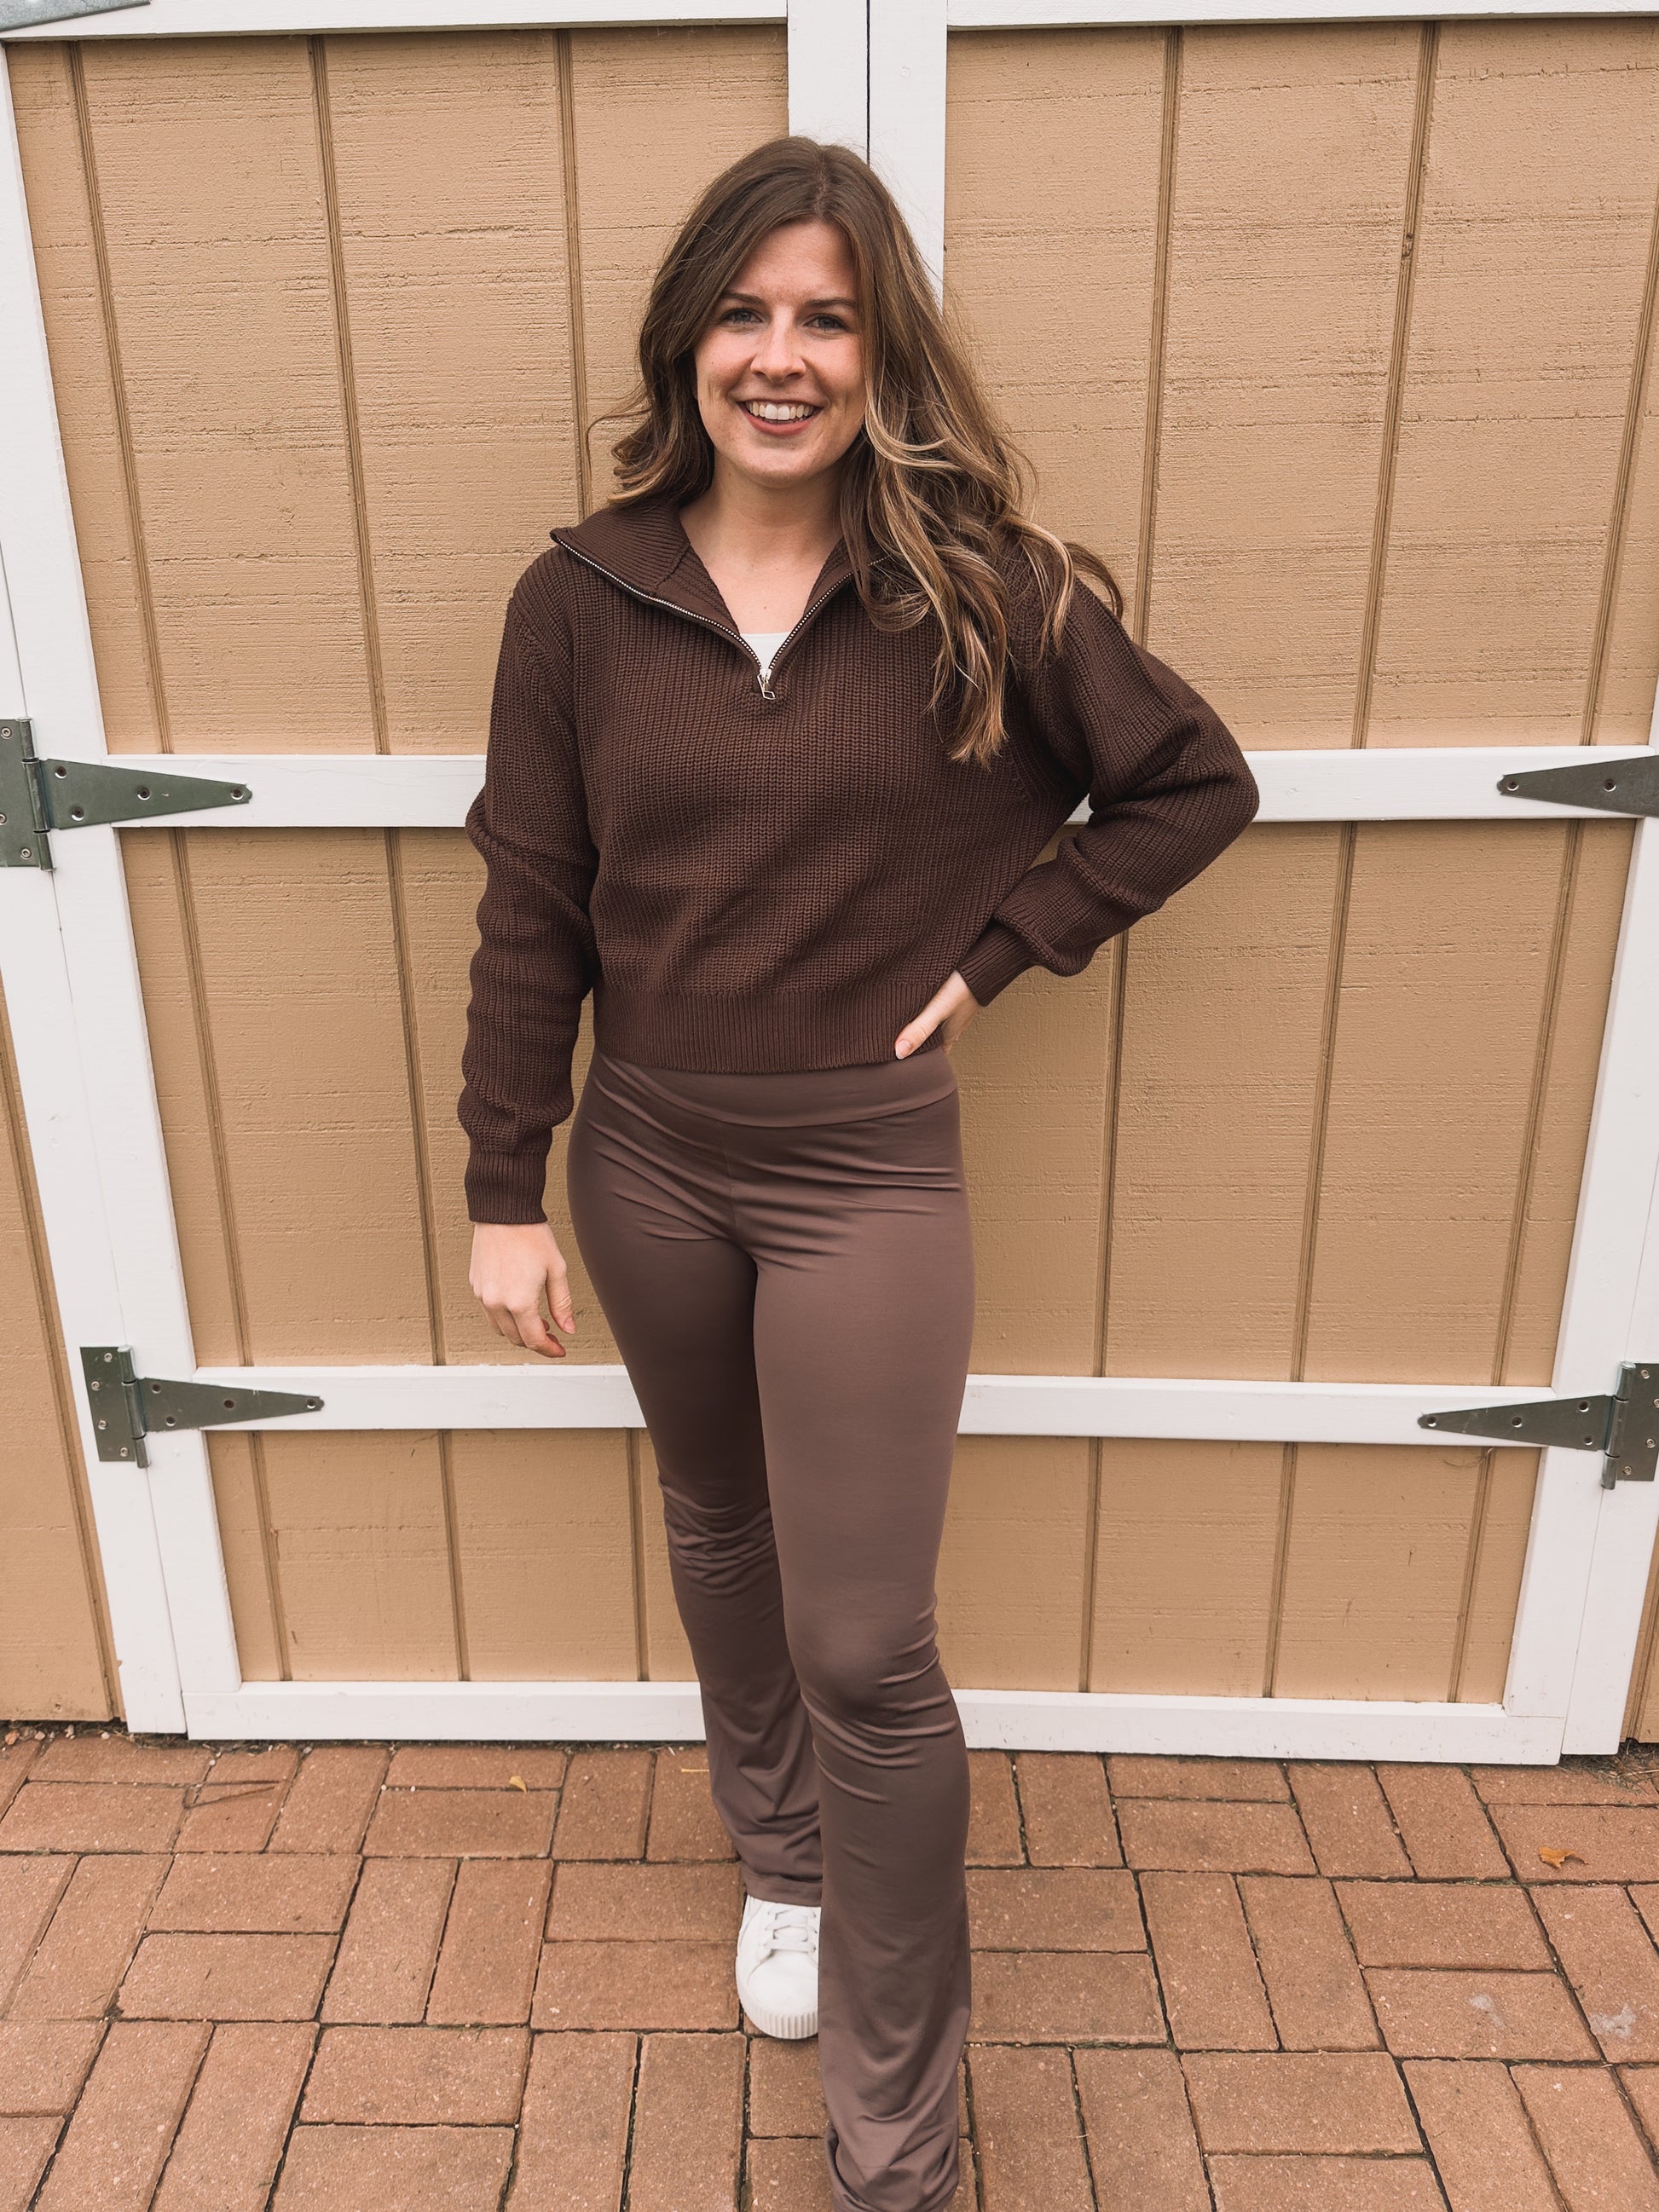 Everyday Flare Leggings in Cocoa (Small-3XL)